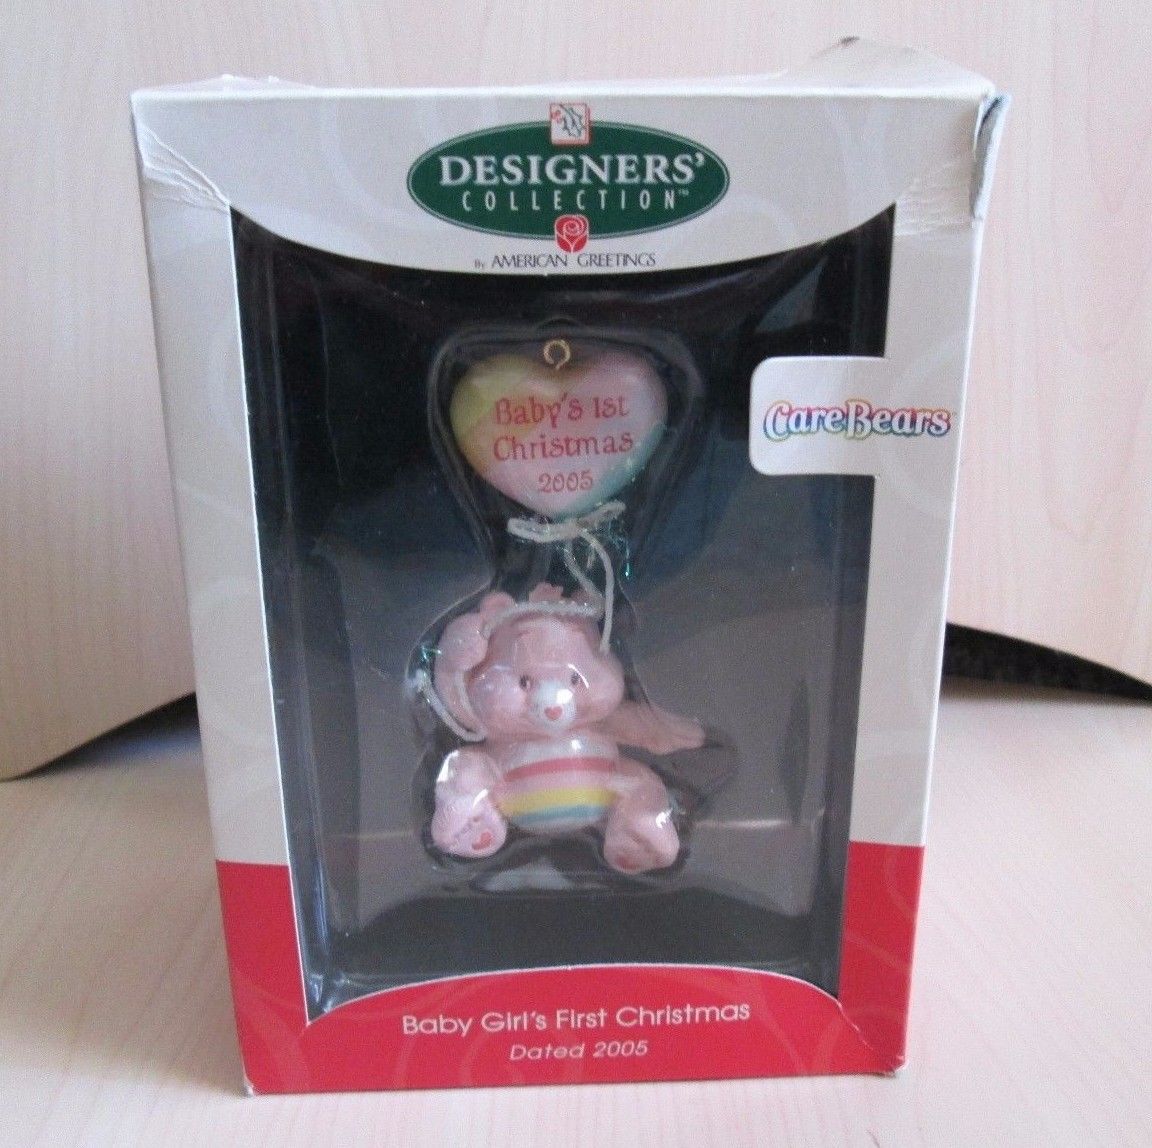 Designers collection Care Bears Baby Girl's First Christmas 2005 Ornament